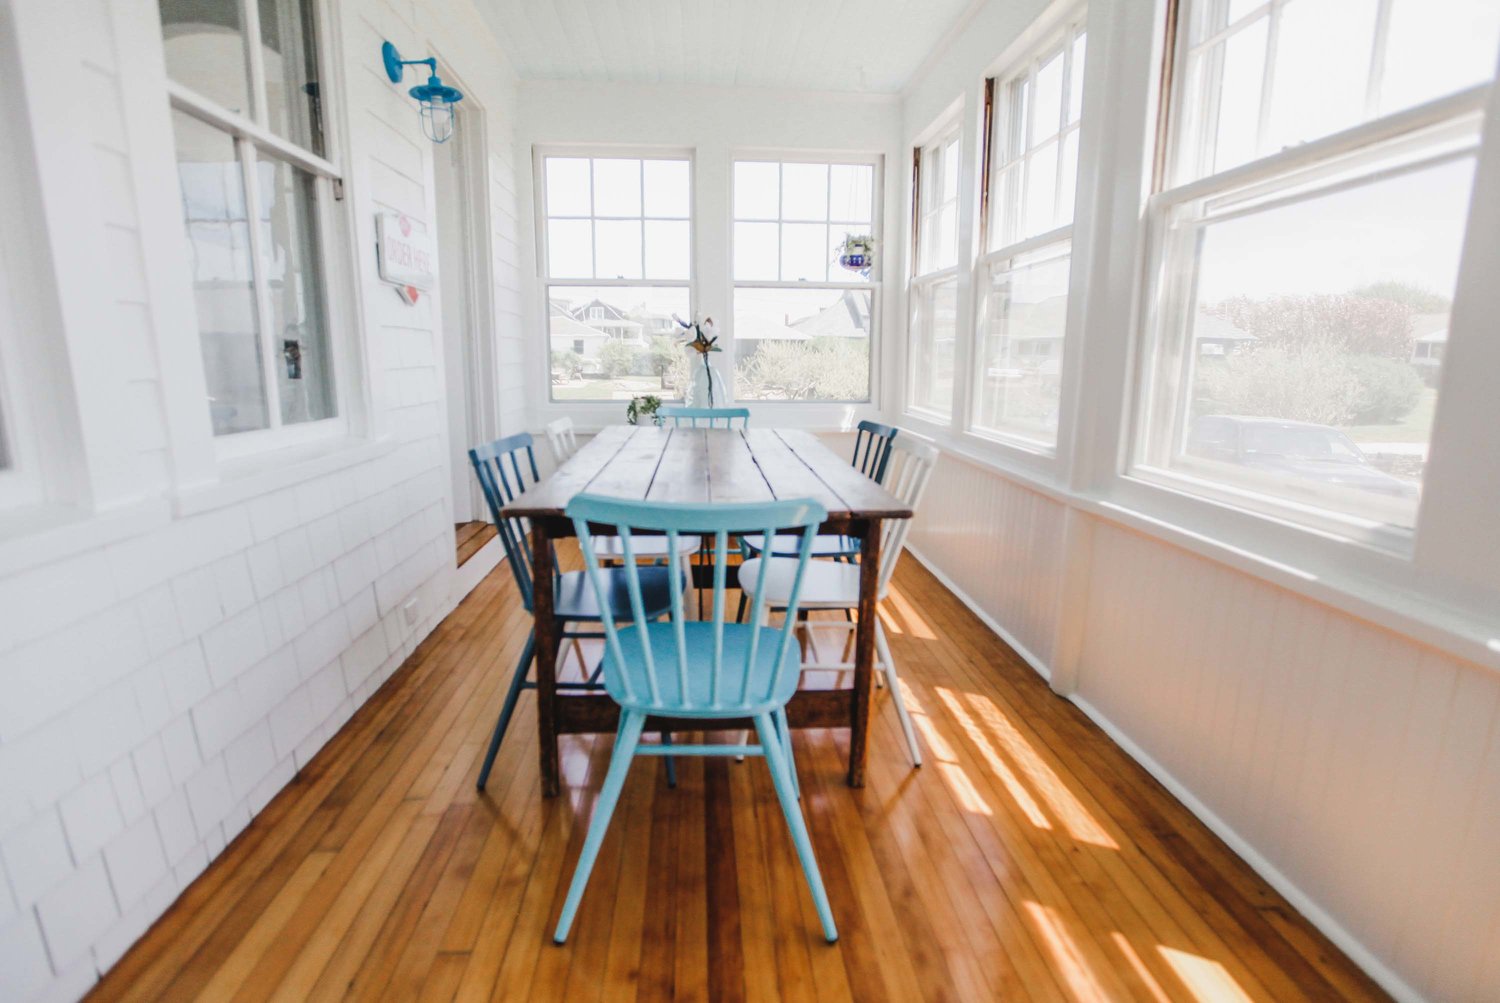 The sunporch dining area offers coastal views